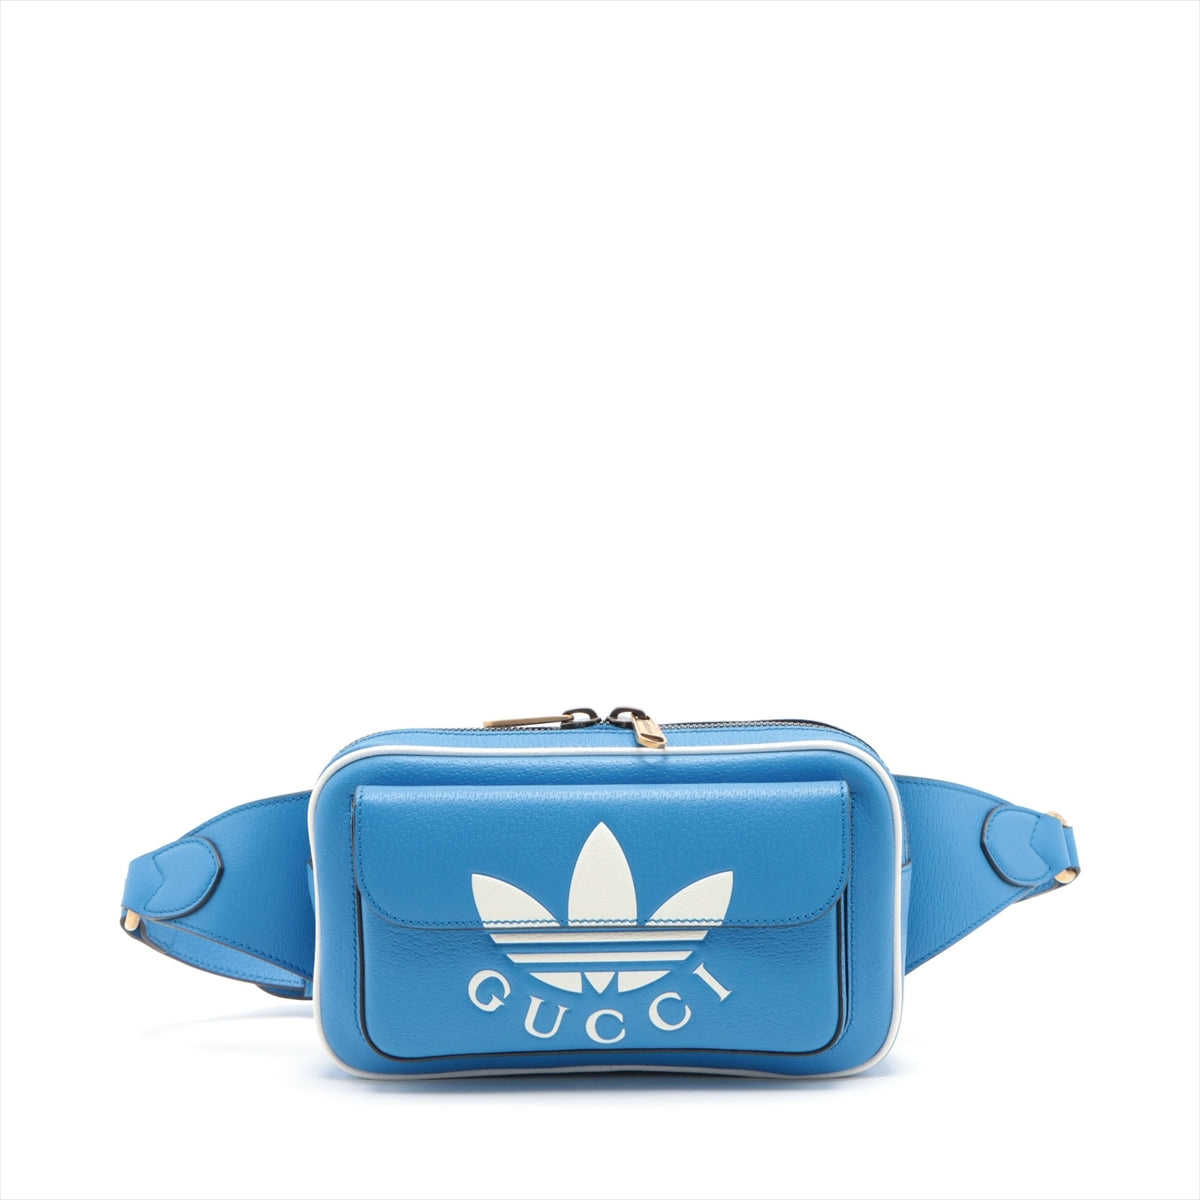 Gucci x adidas Leather Sling backpack Blue 722141